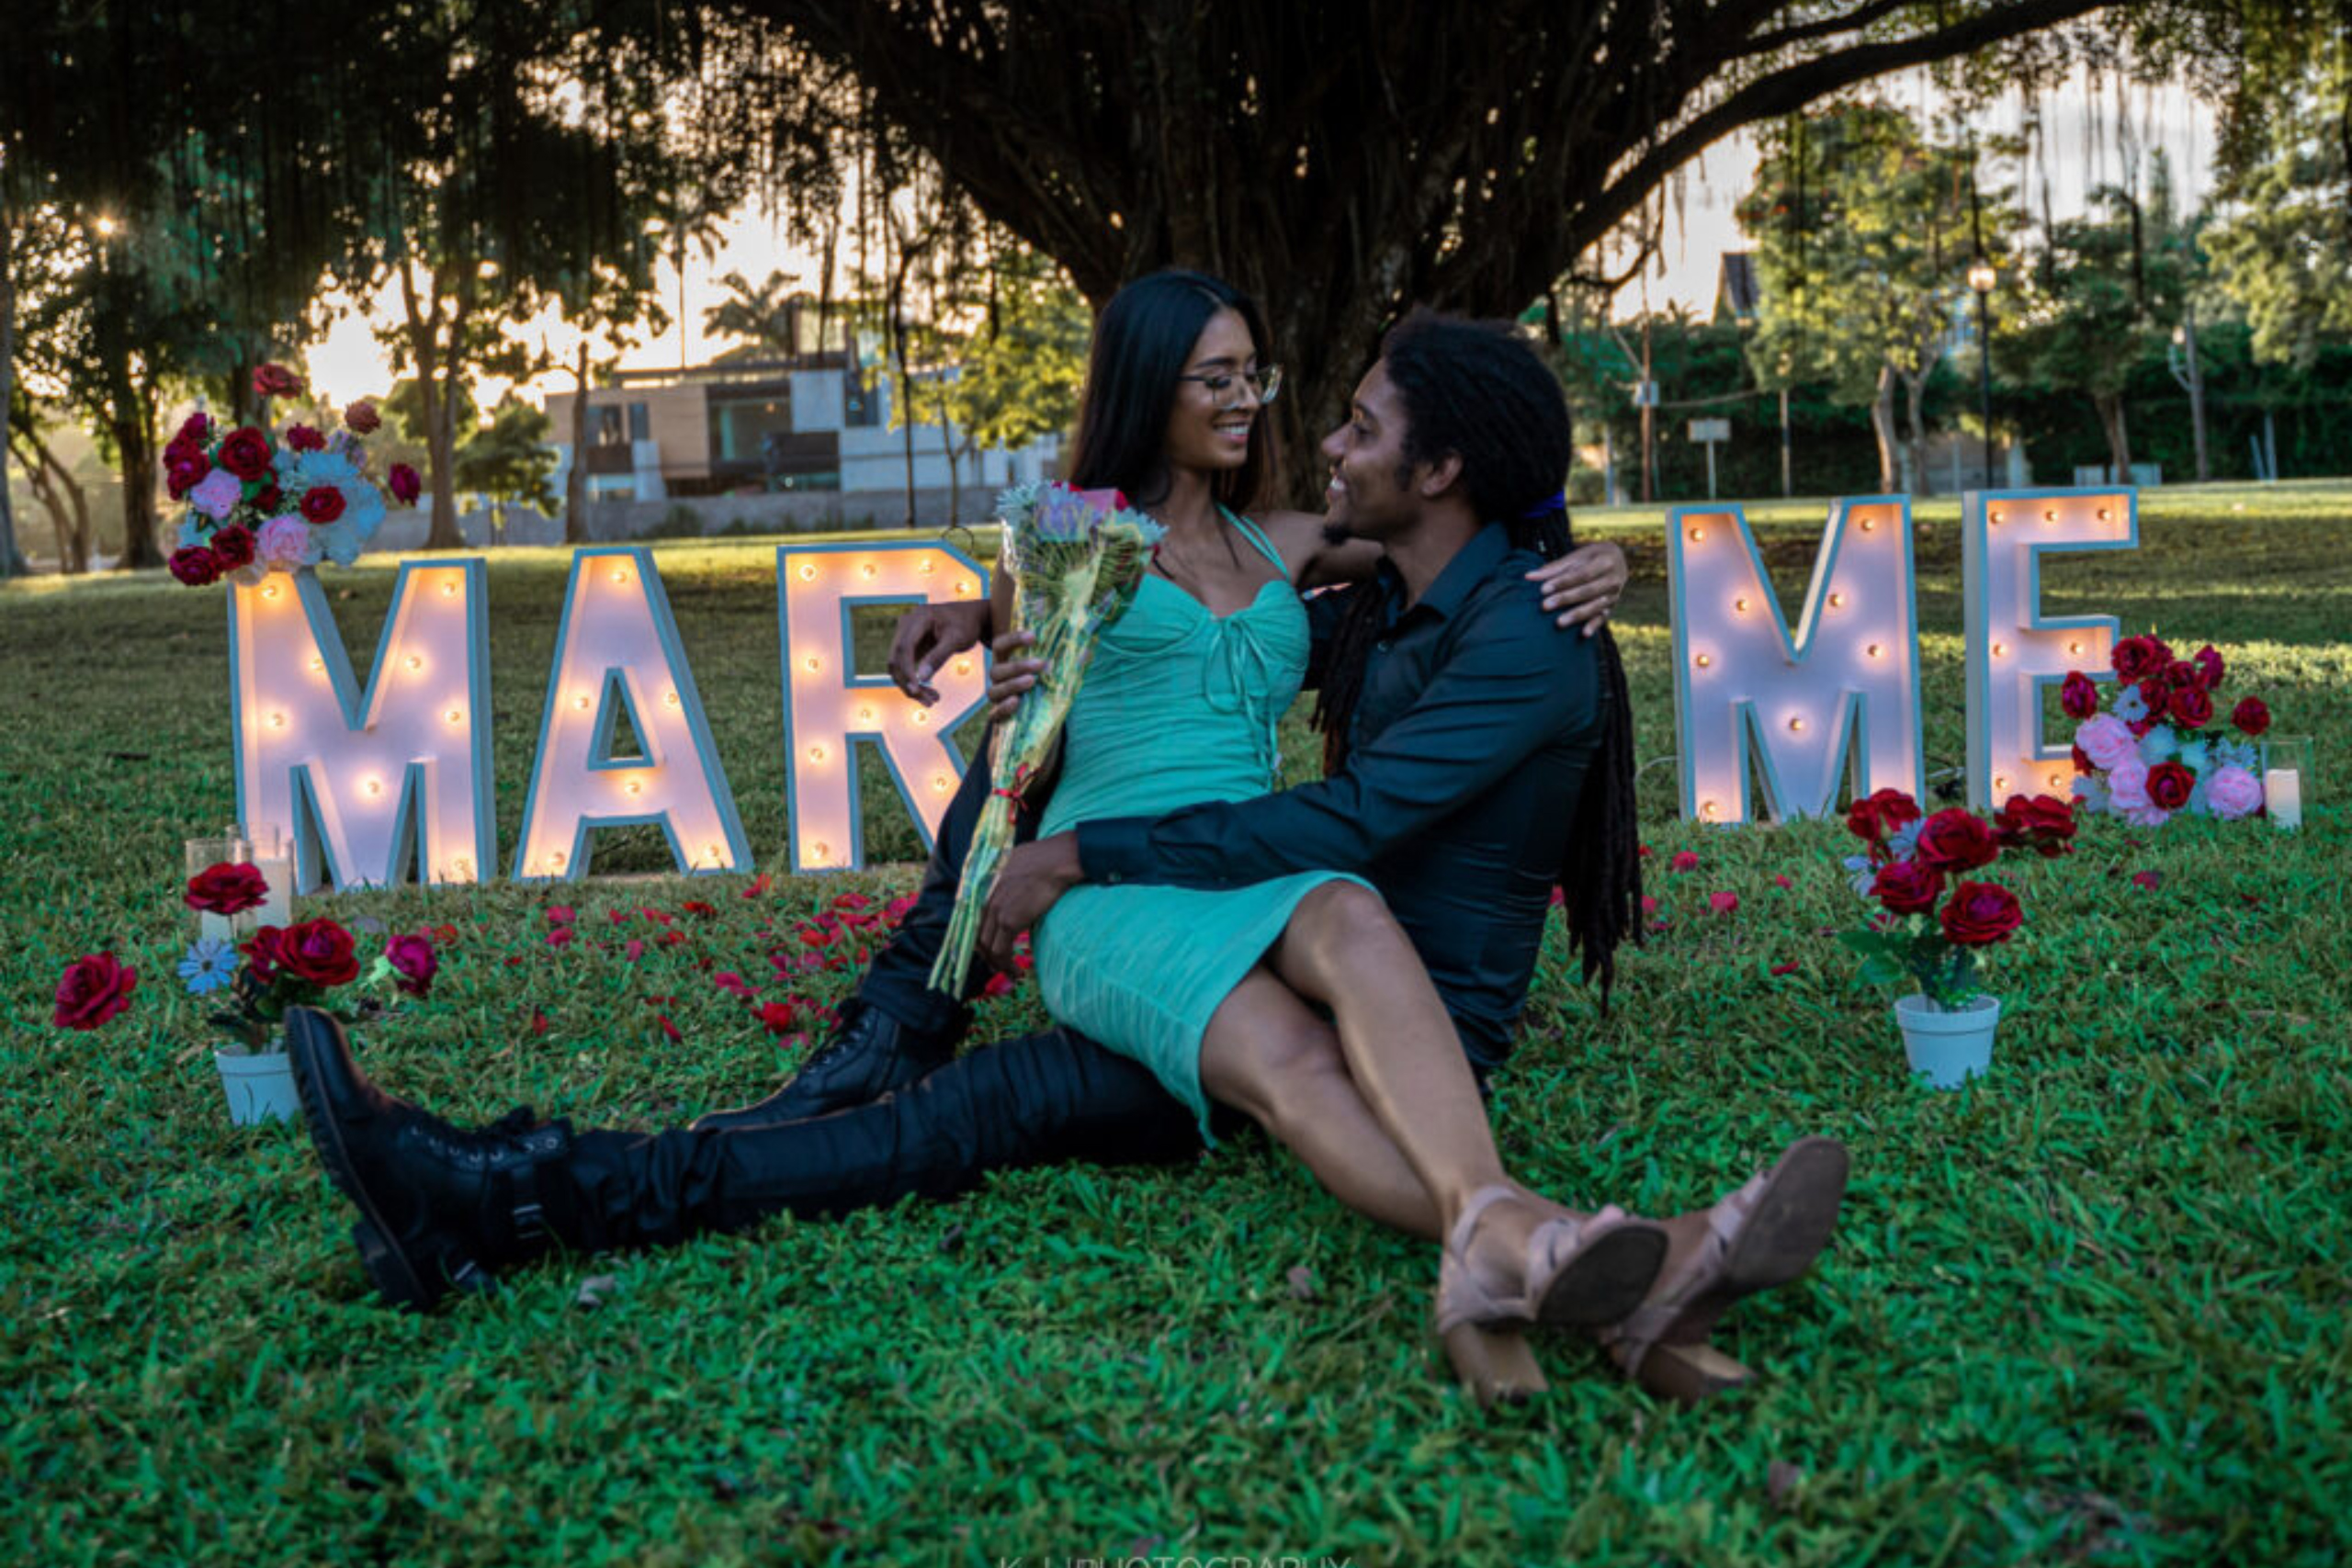 Romantic Outdoor Proposal at Jackson Square Port of Spain Trinidad and Tobago. Setup by Picnic-Perfect Ltd. Photo by KJ photography